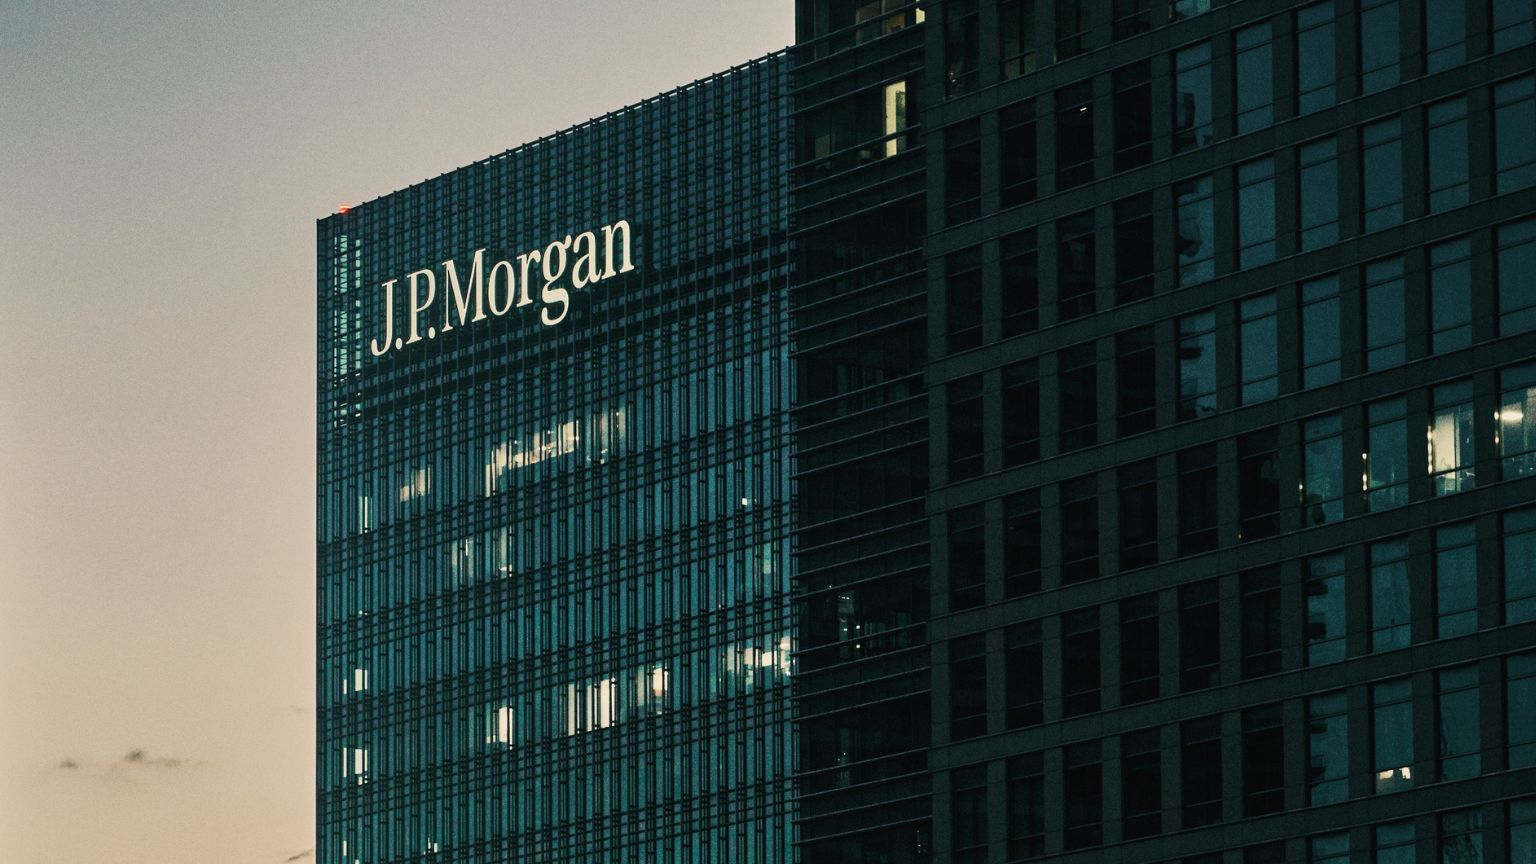 JPMorgan Chase is warned to back off political and ideological censorship